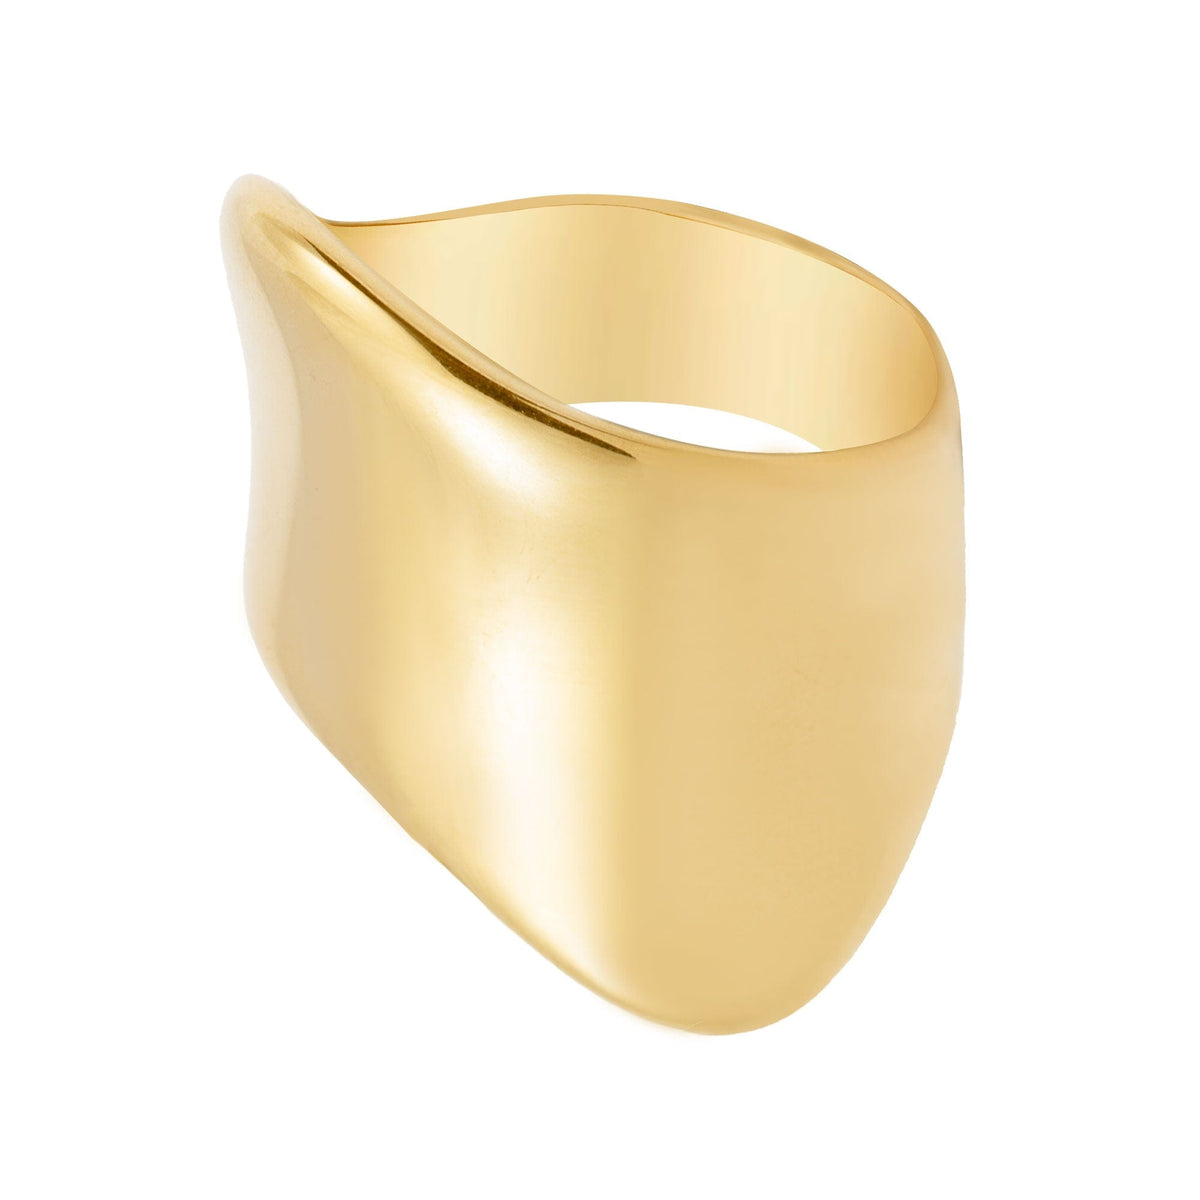 BohoMoon Stainless Steel Nostalgia Ring Gold / US 6 / UK L / EUR 51 (small)